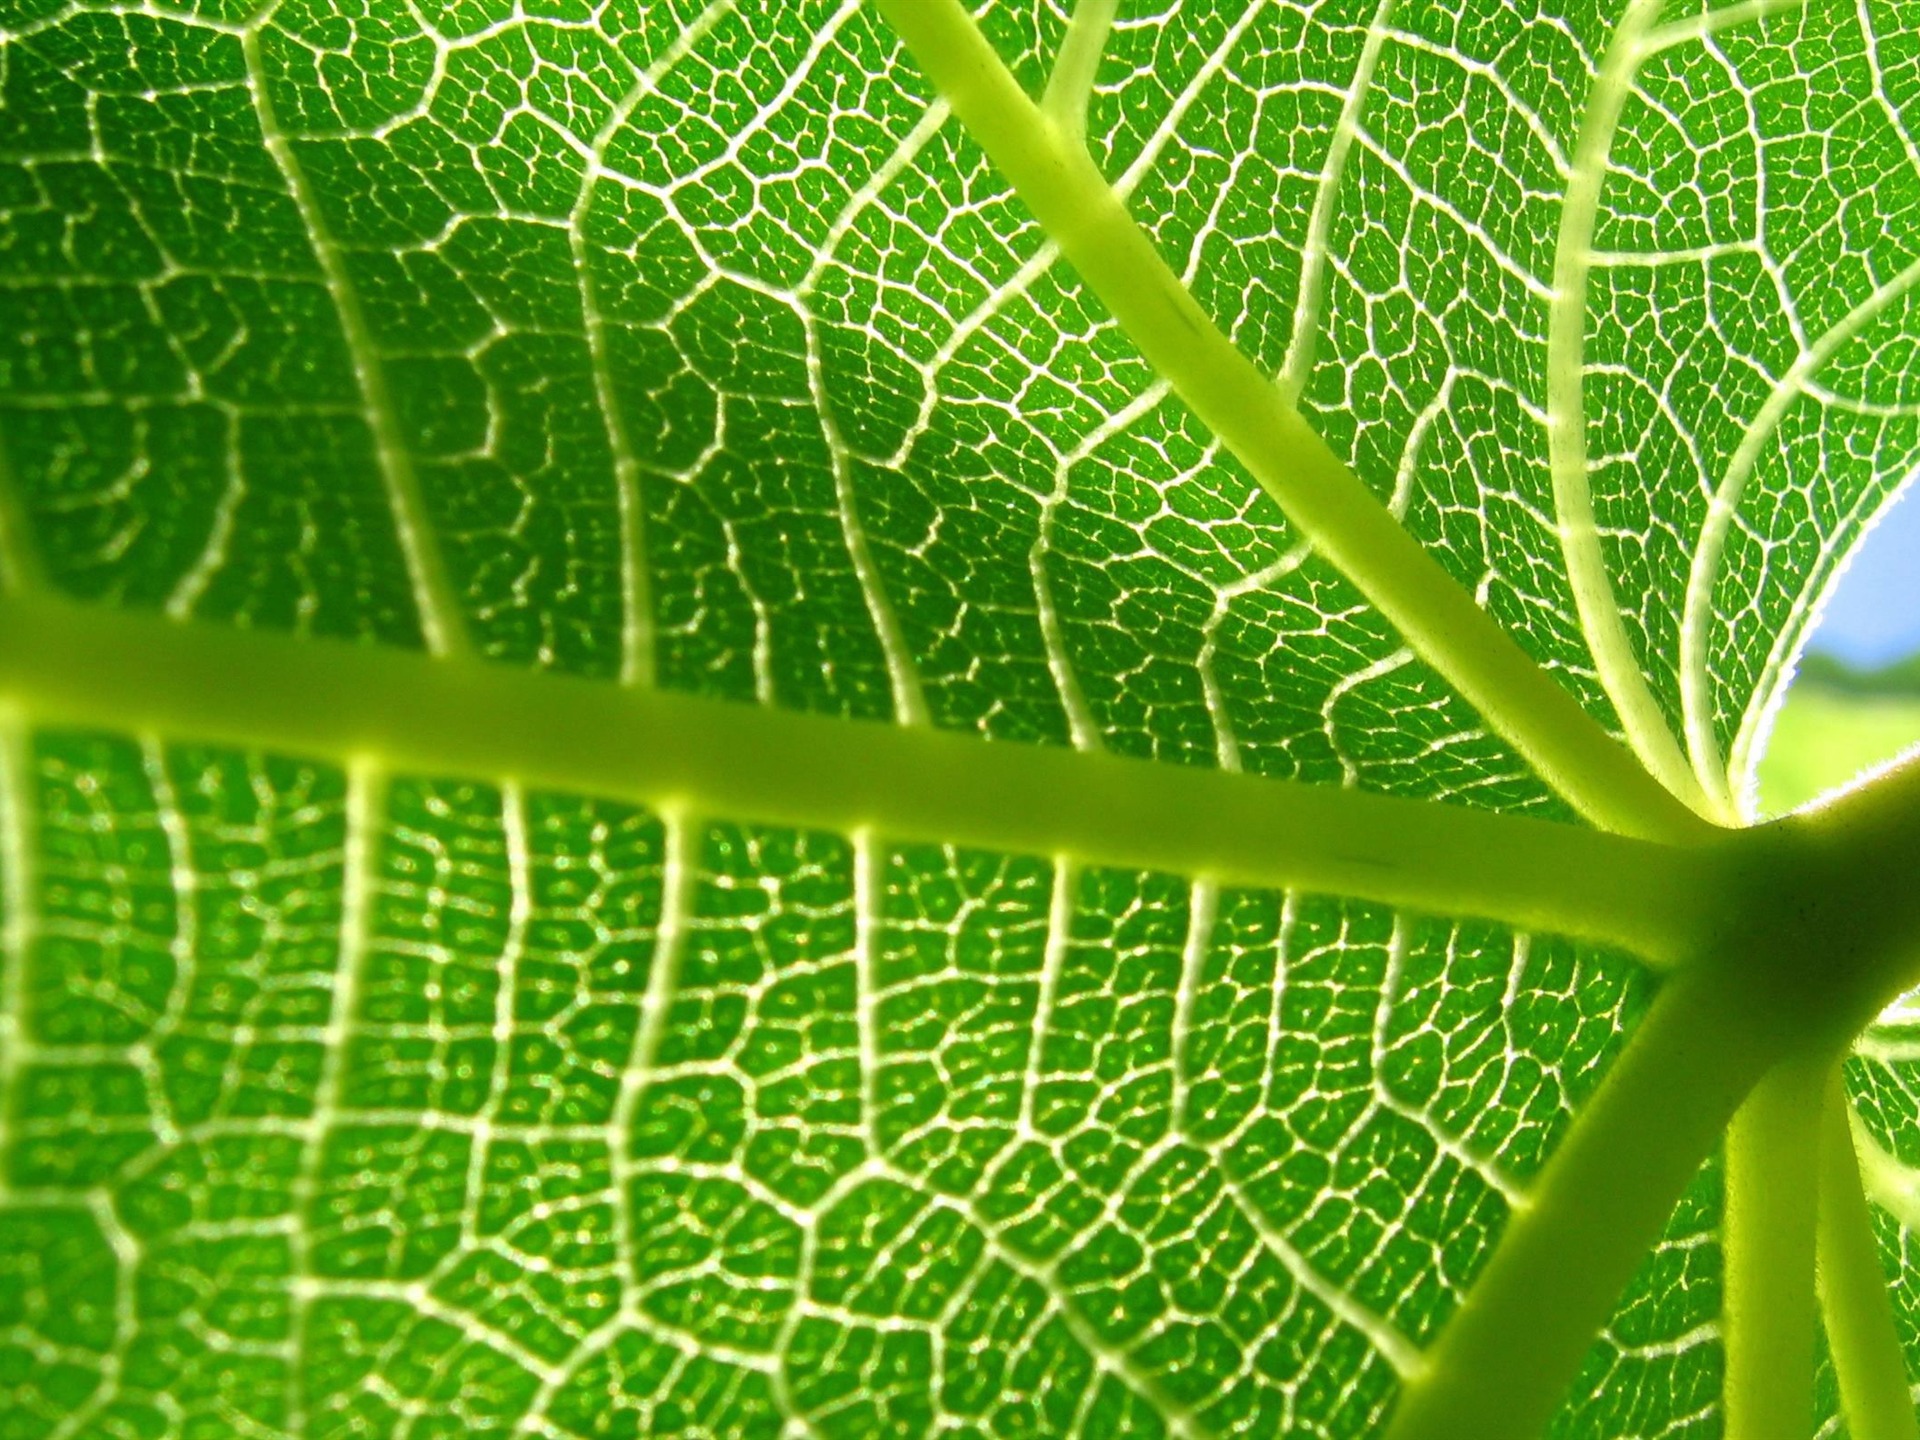 Large green leaves close-up flower wallpaper (2) #13 - 1920x1440